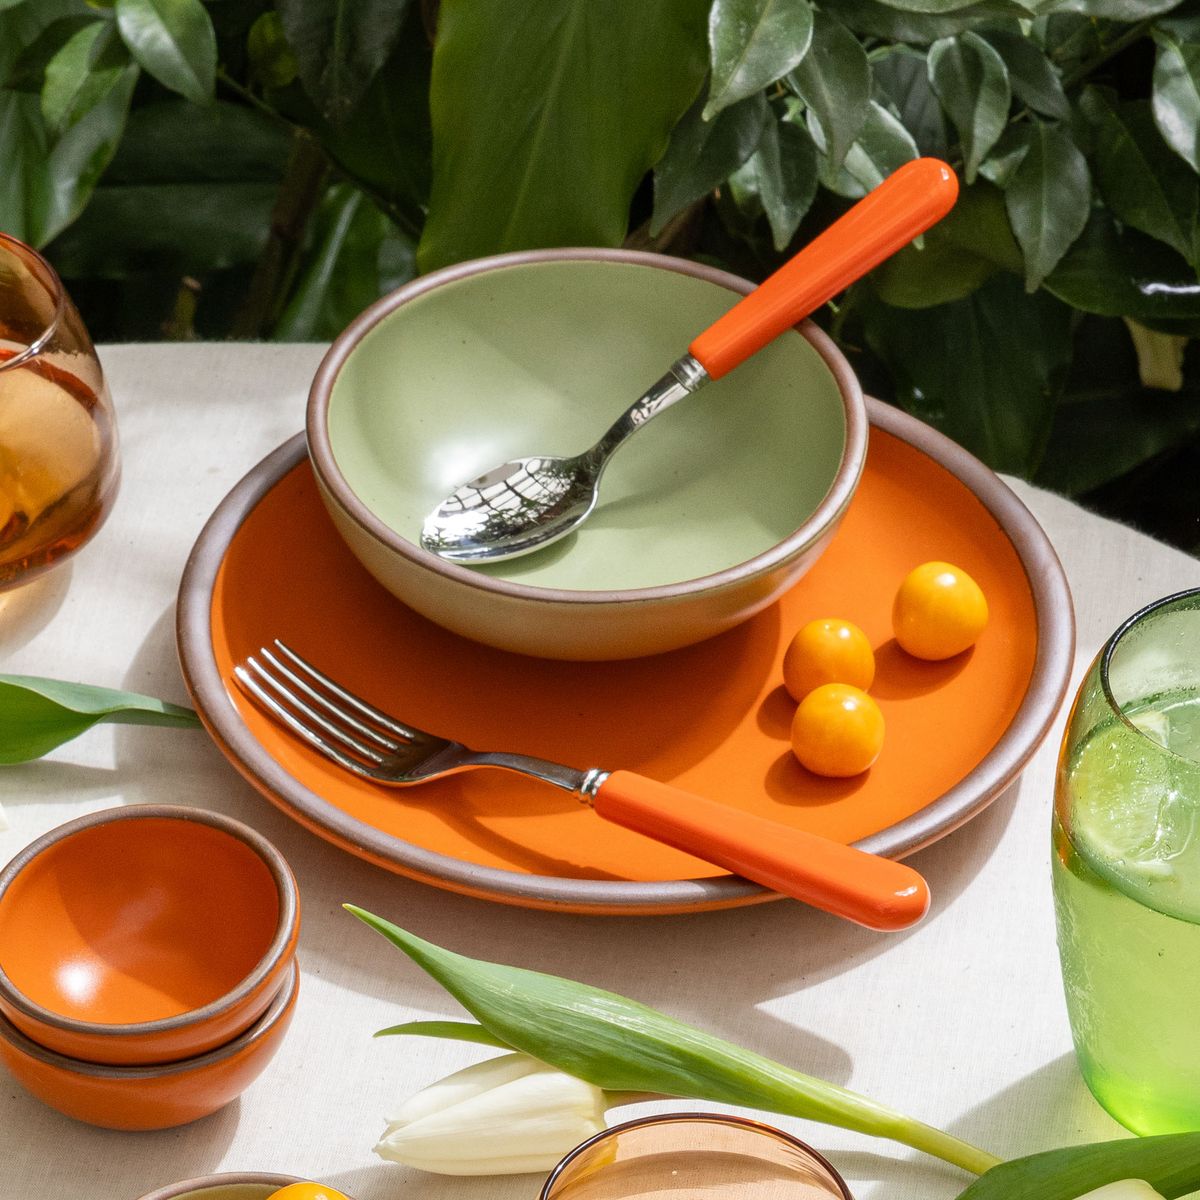 A table setting featuring a bold orange plate and tiny bowls, a sage green shallow bowl, and bold orange handled fork and spoon.